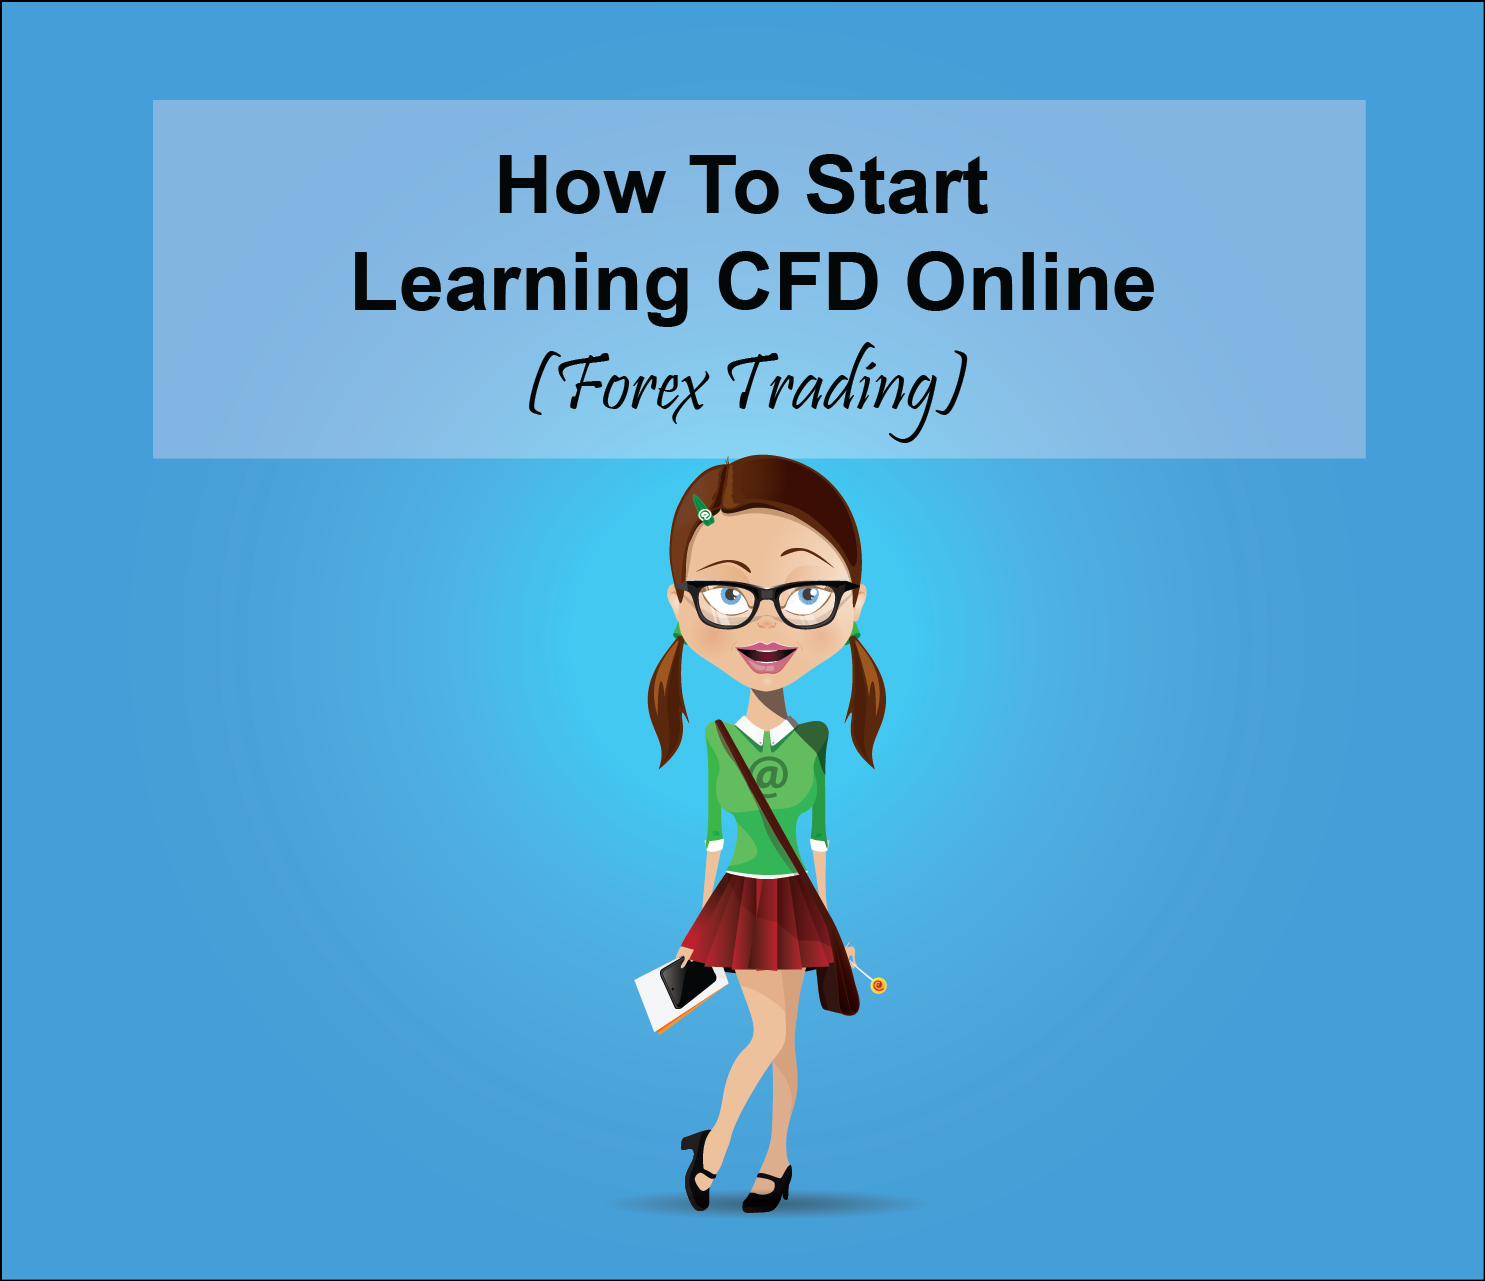 How to Start learning CFD Online